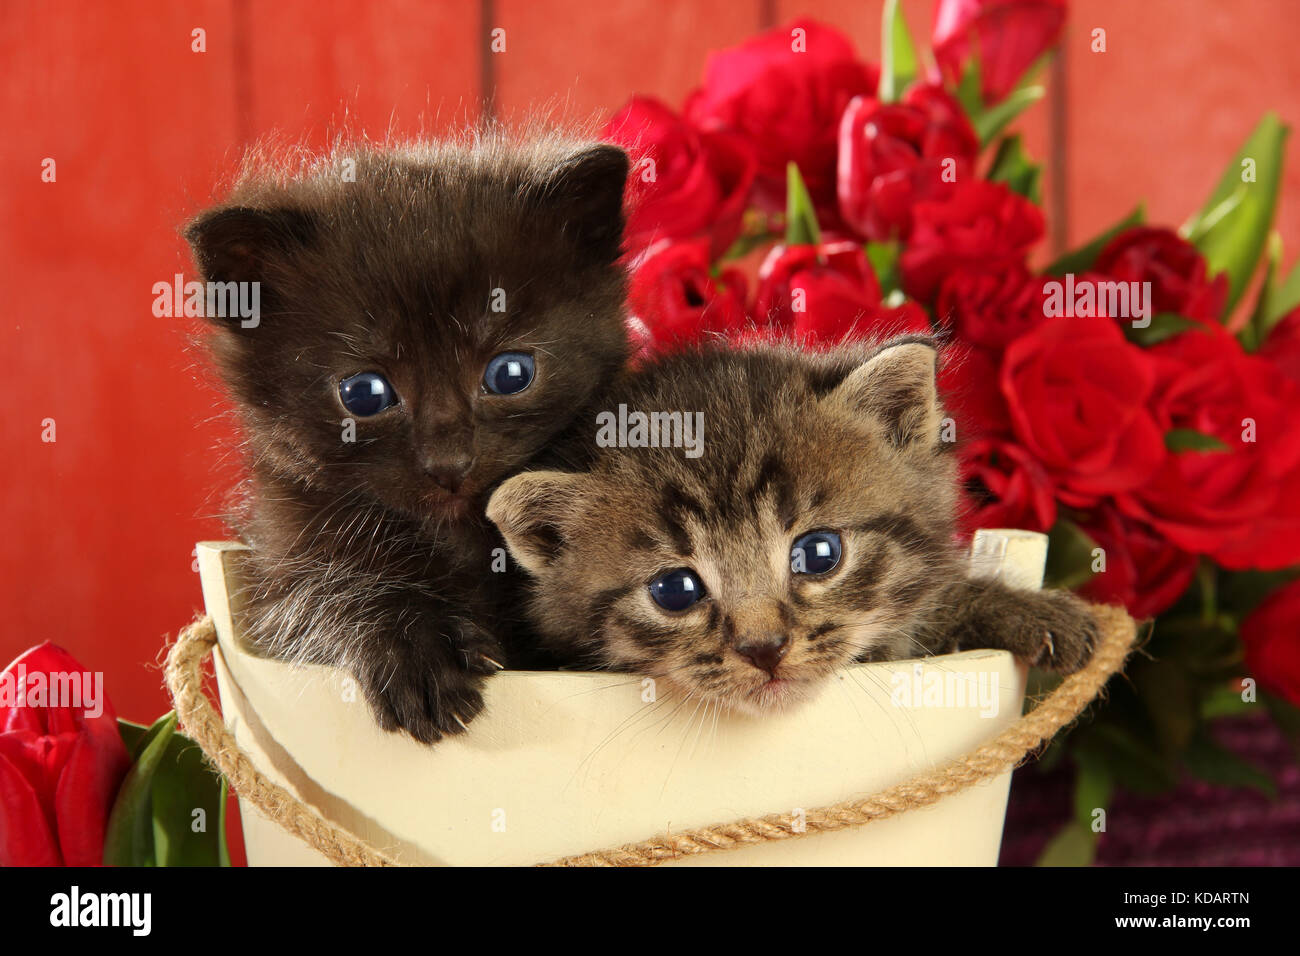 two kittens, black, black tabby, 4 weeks old, sitting in a basket Stock Photo